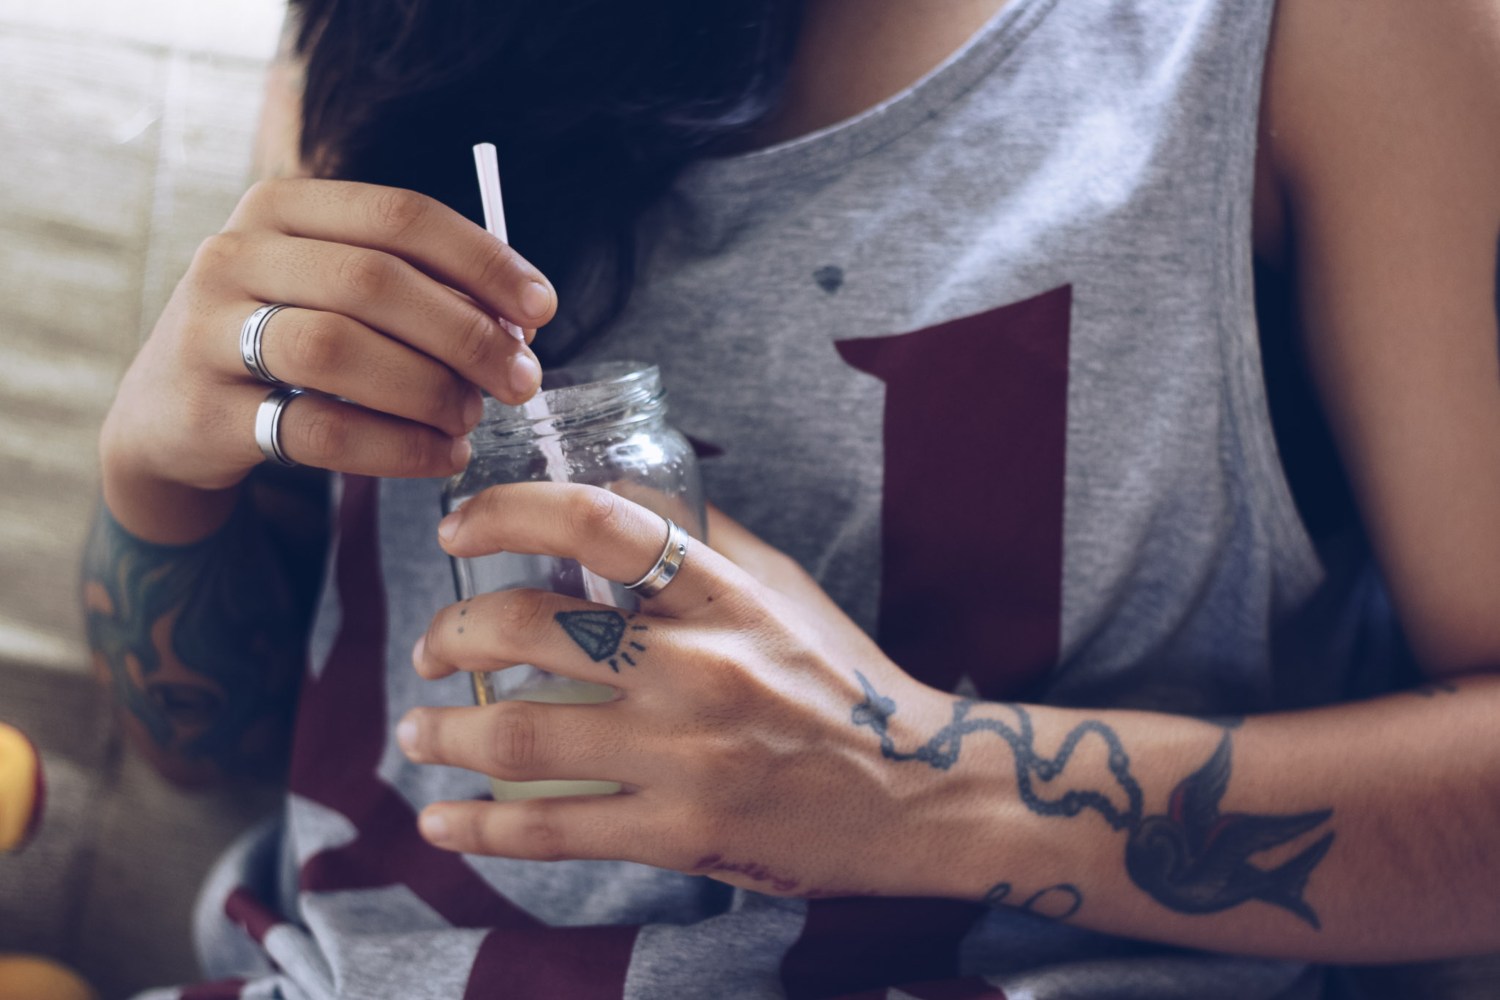 Why You Should Eat Before Getting A Tattoo